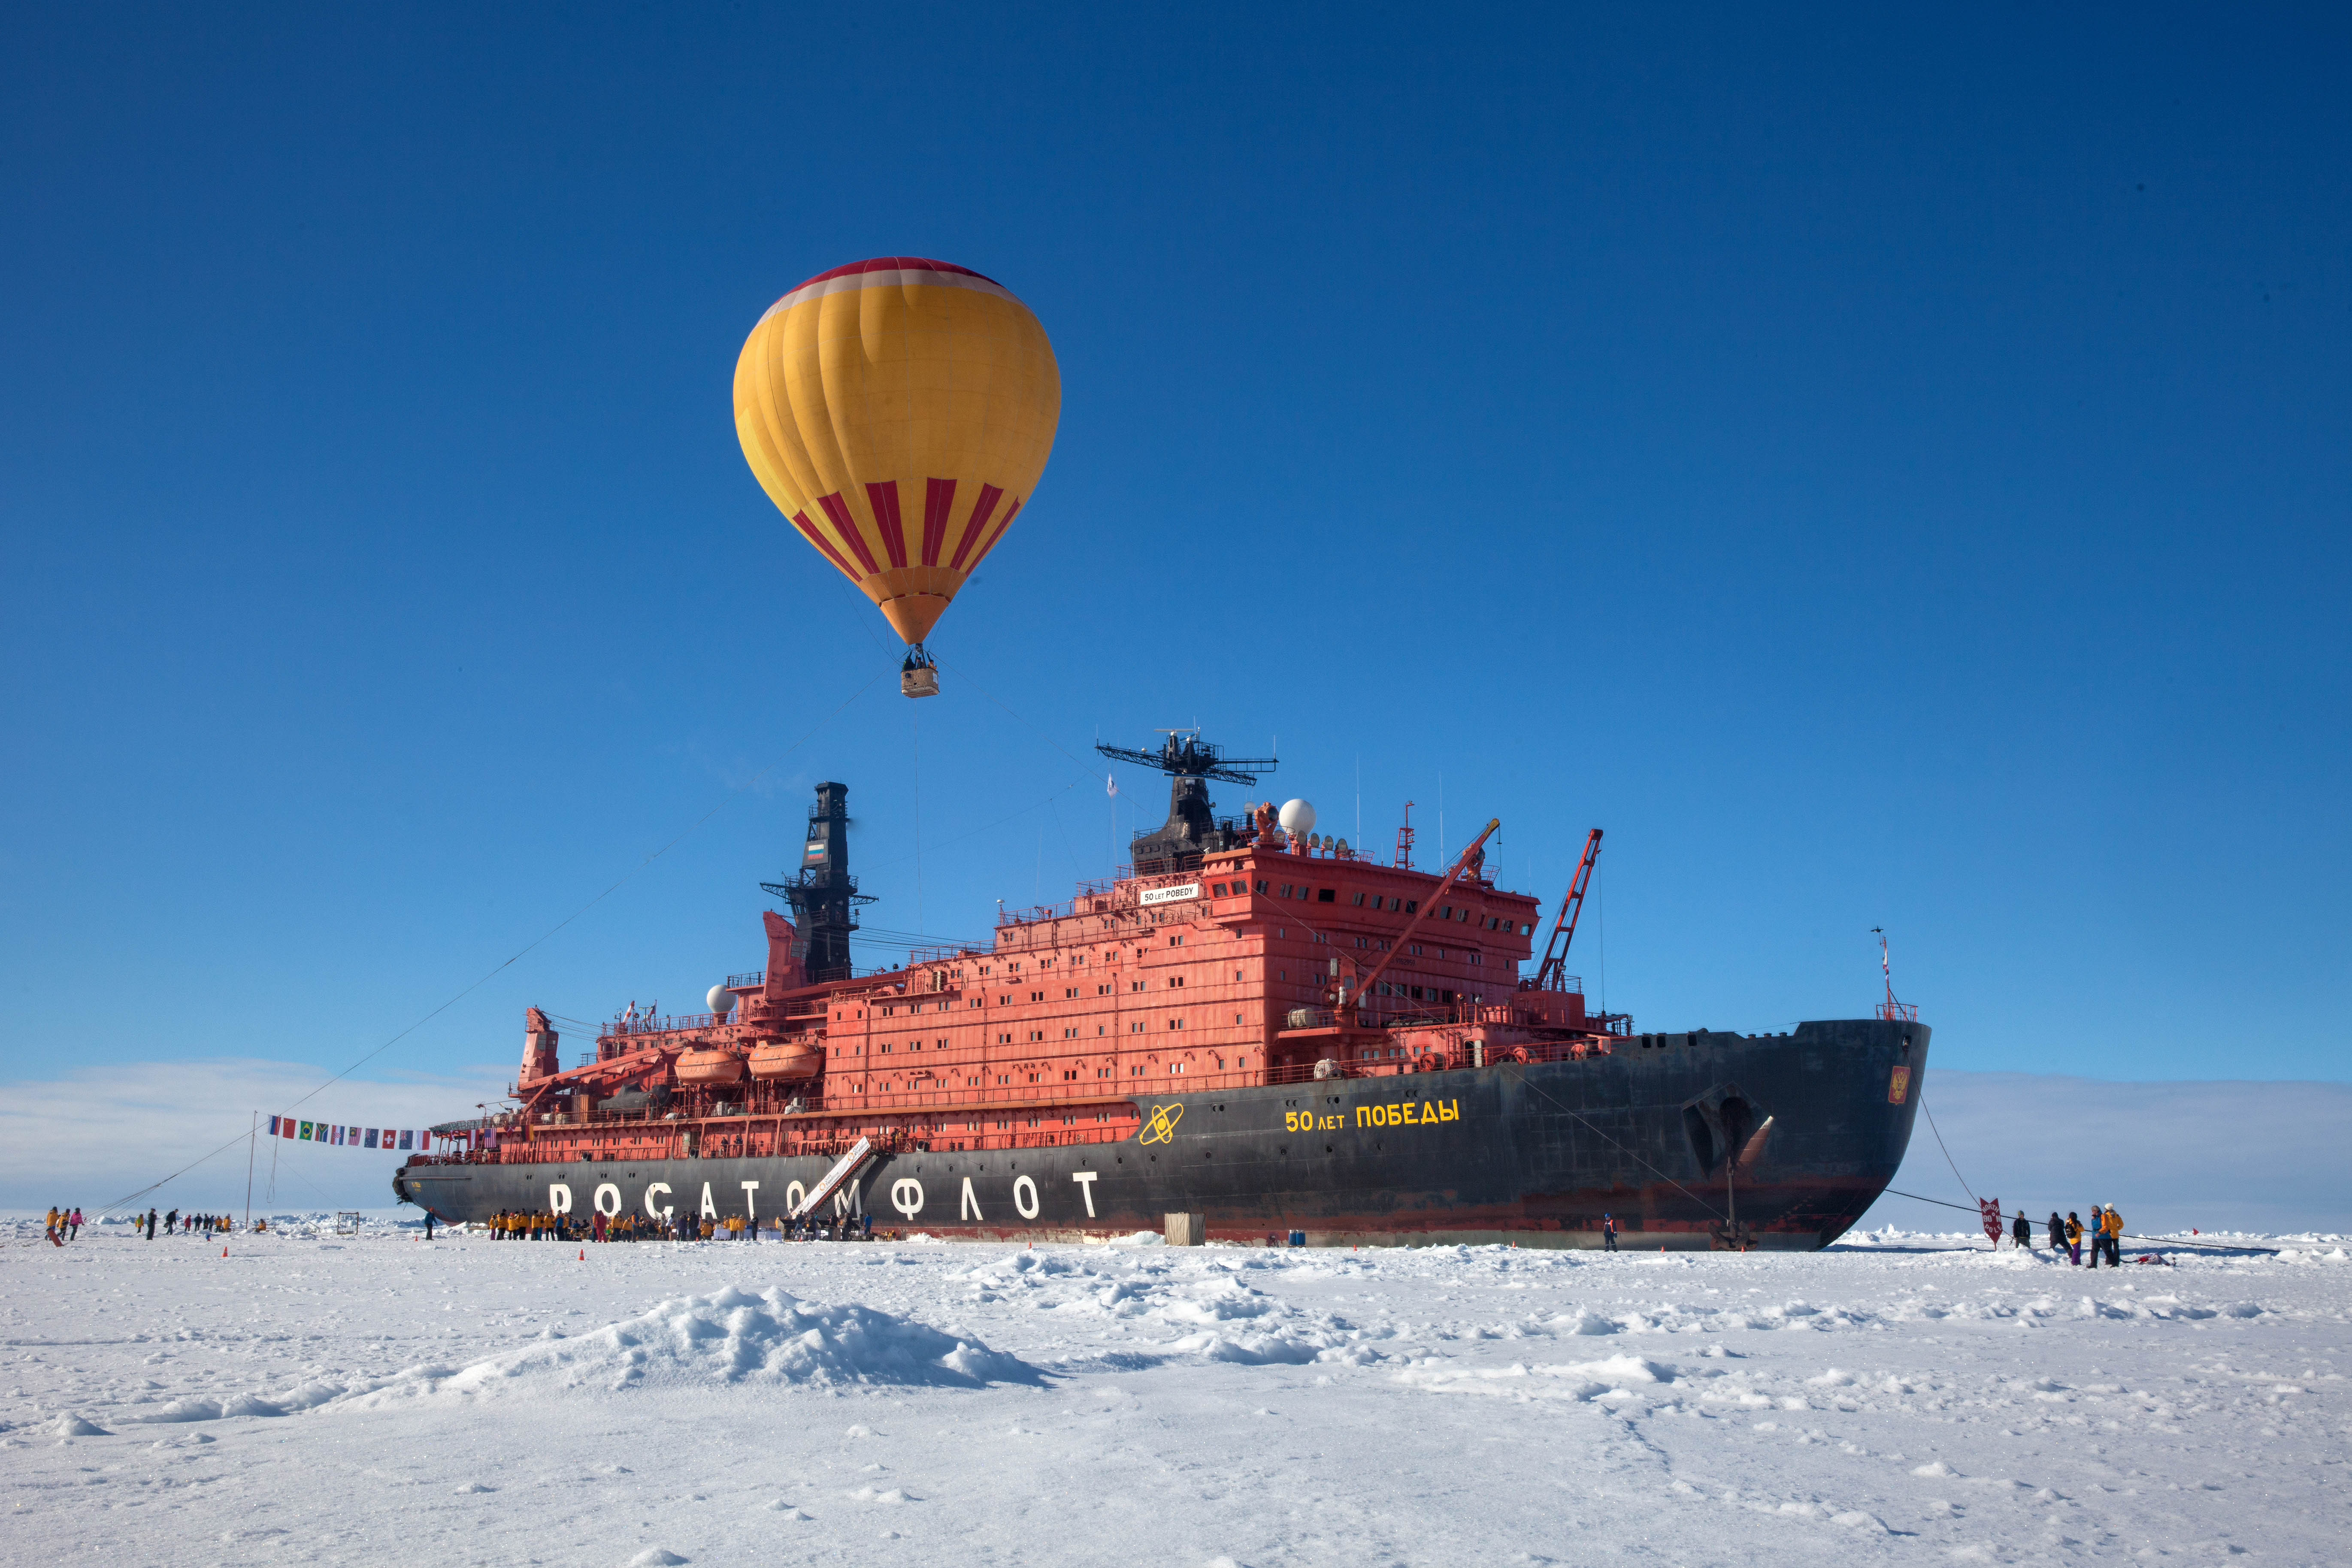 Travel to the North Pole aboard the only working Russian nuclear icebreaker in the world.